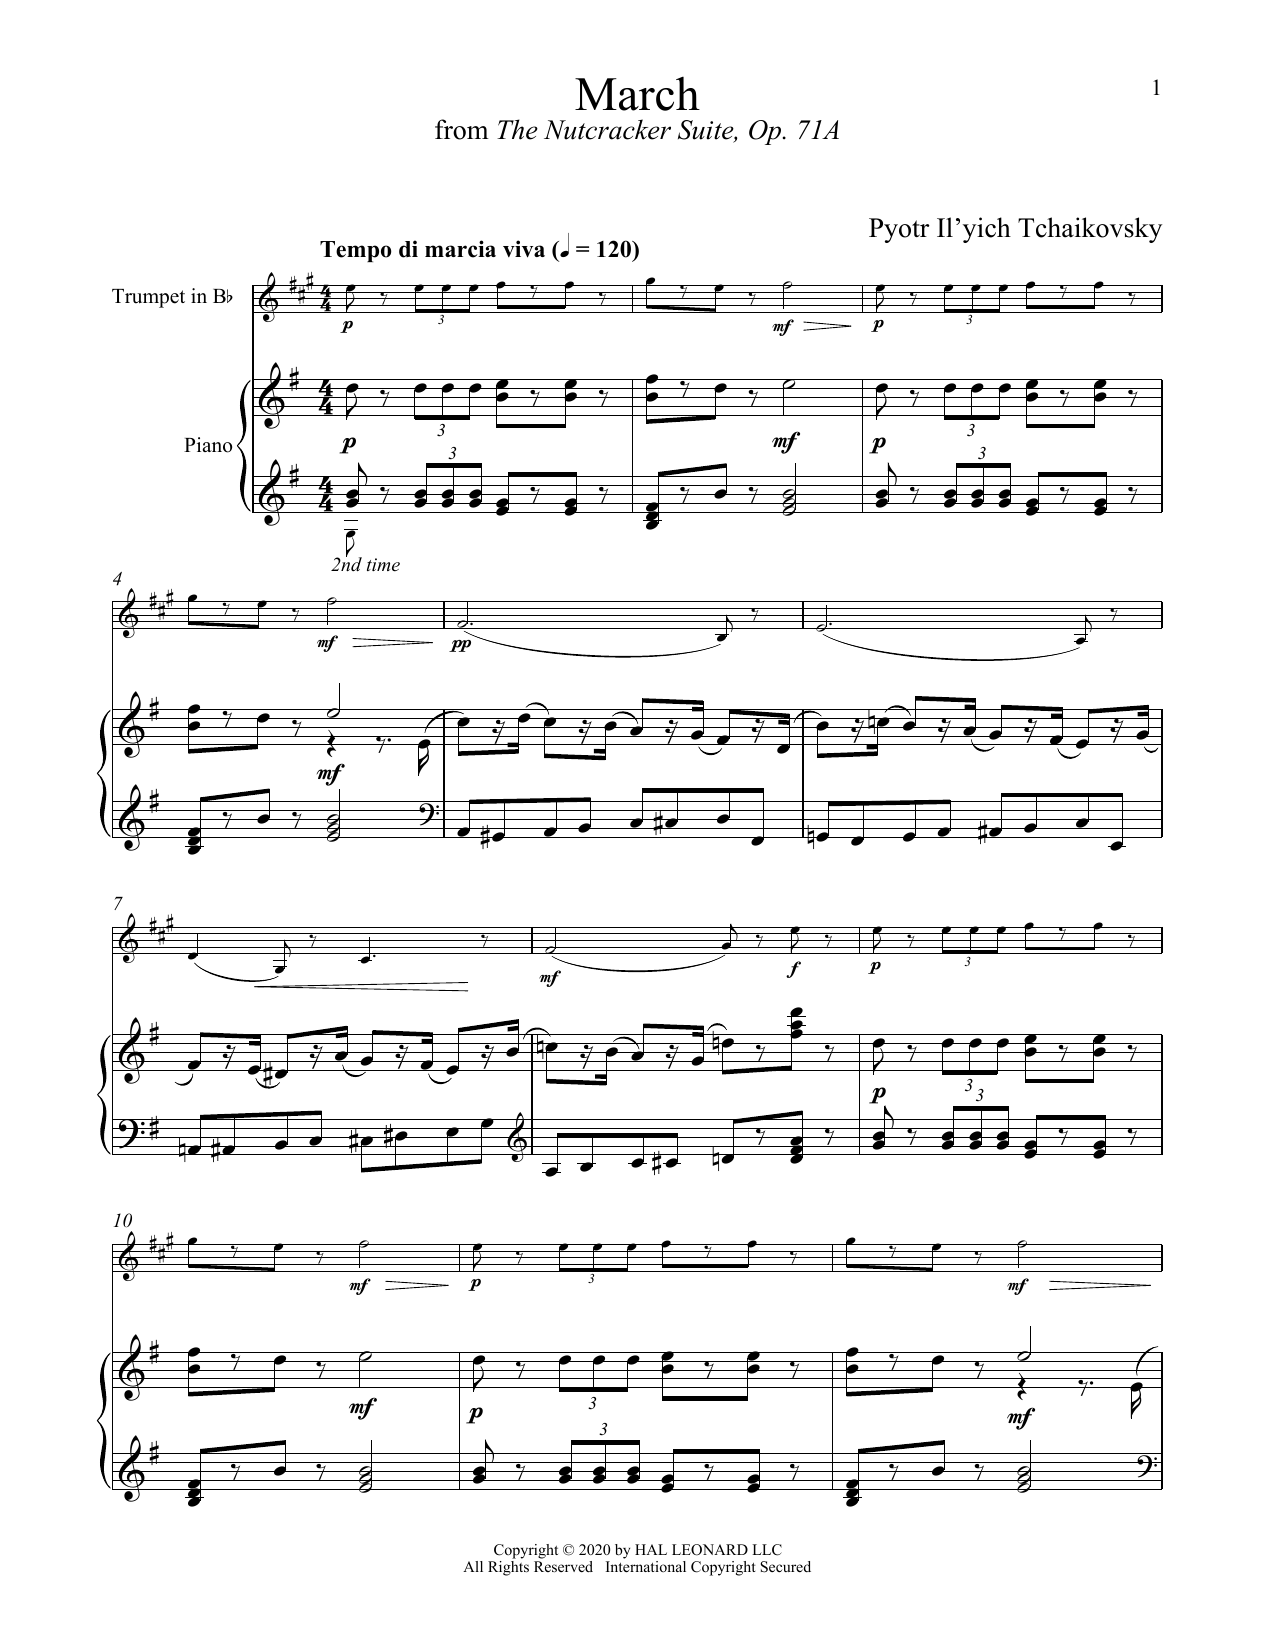 Download Pyotr Il'yich Tchaikovsky March, Op. 71a (from The Nutcracker) Sheet Music